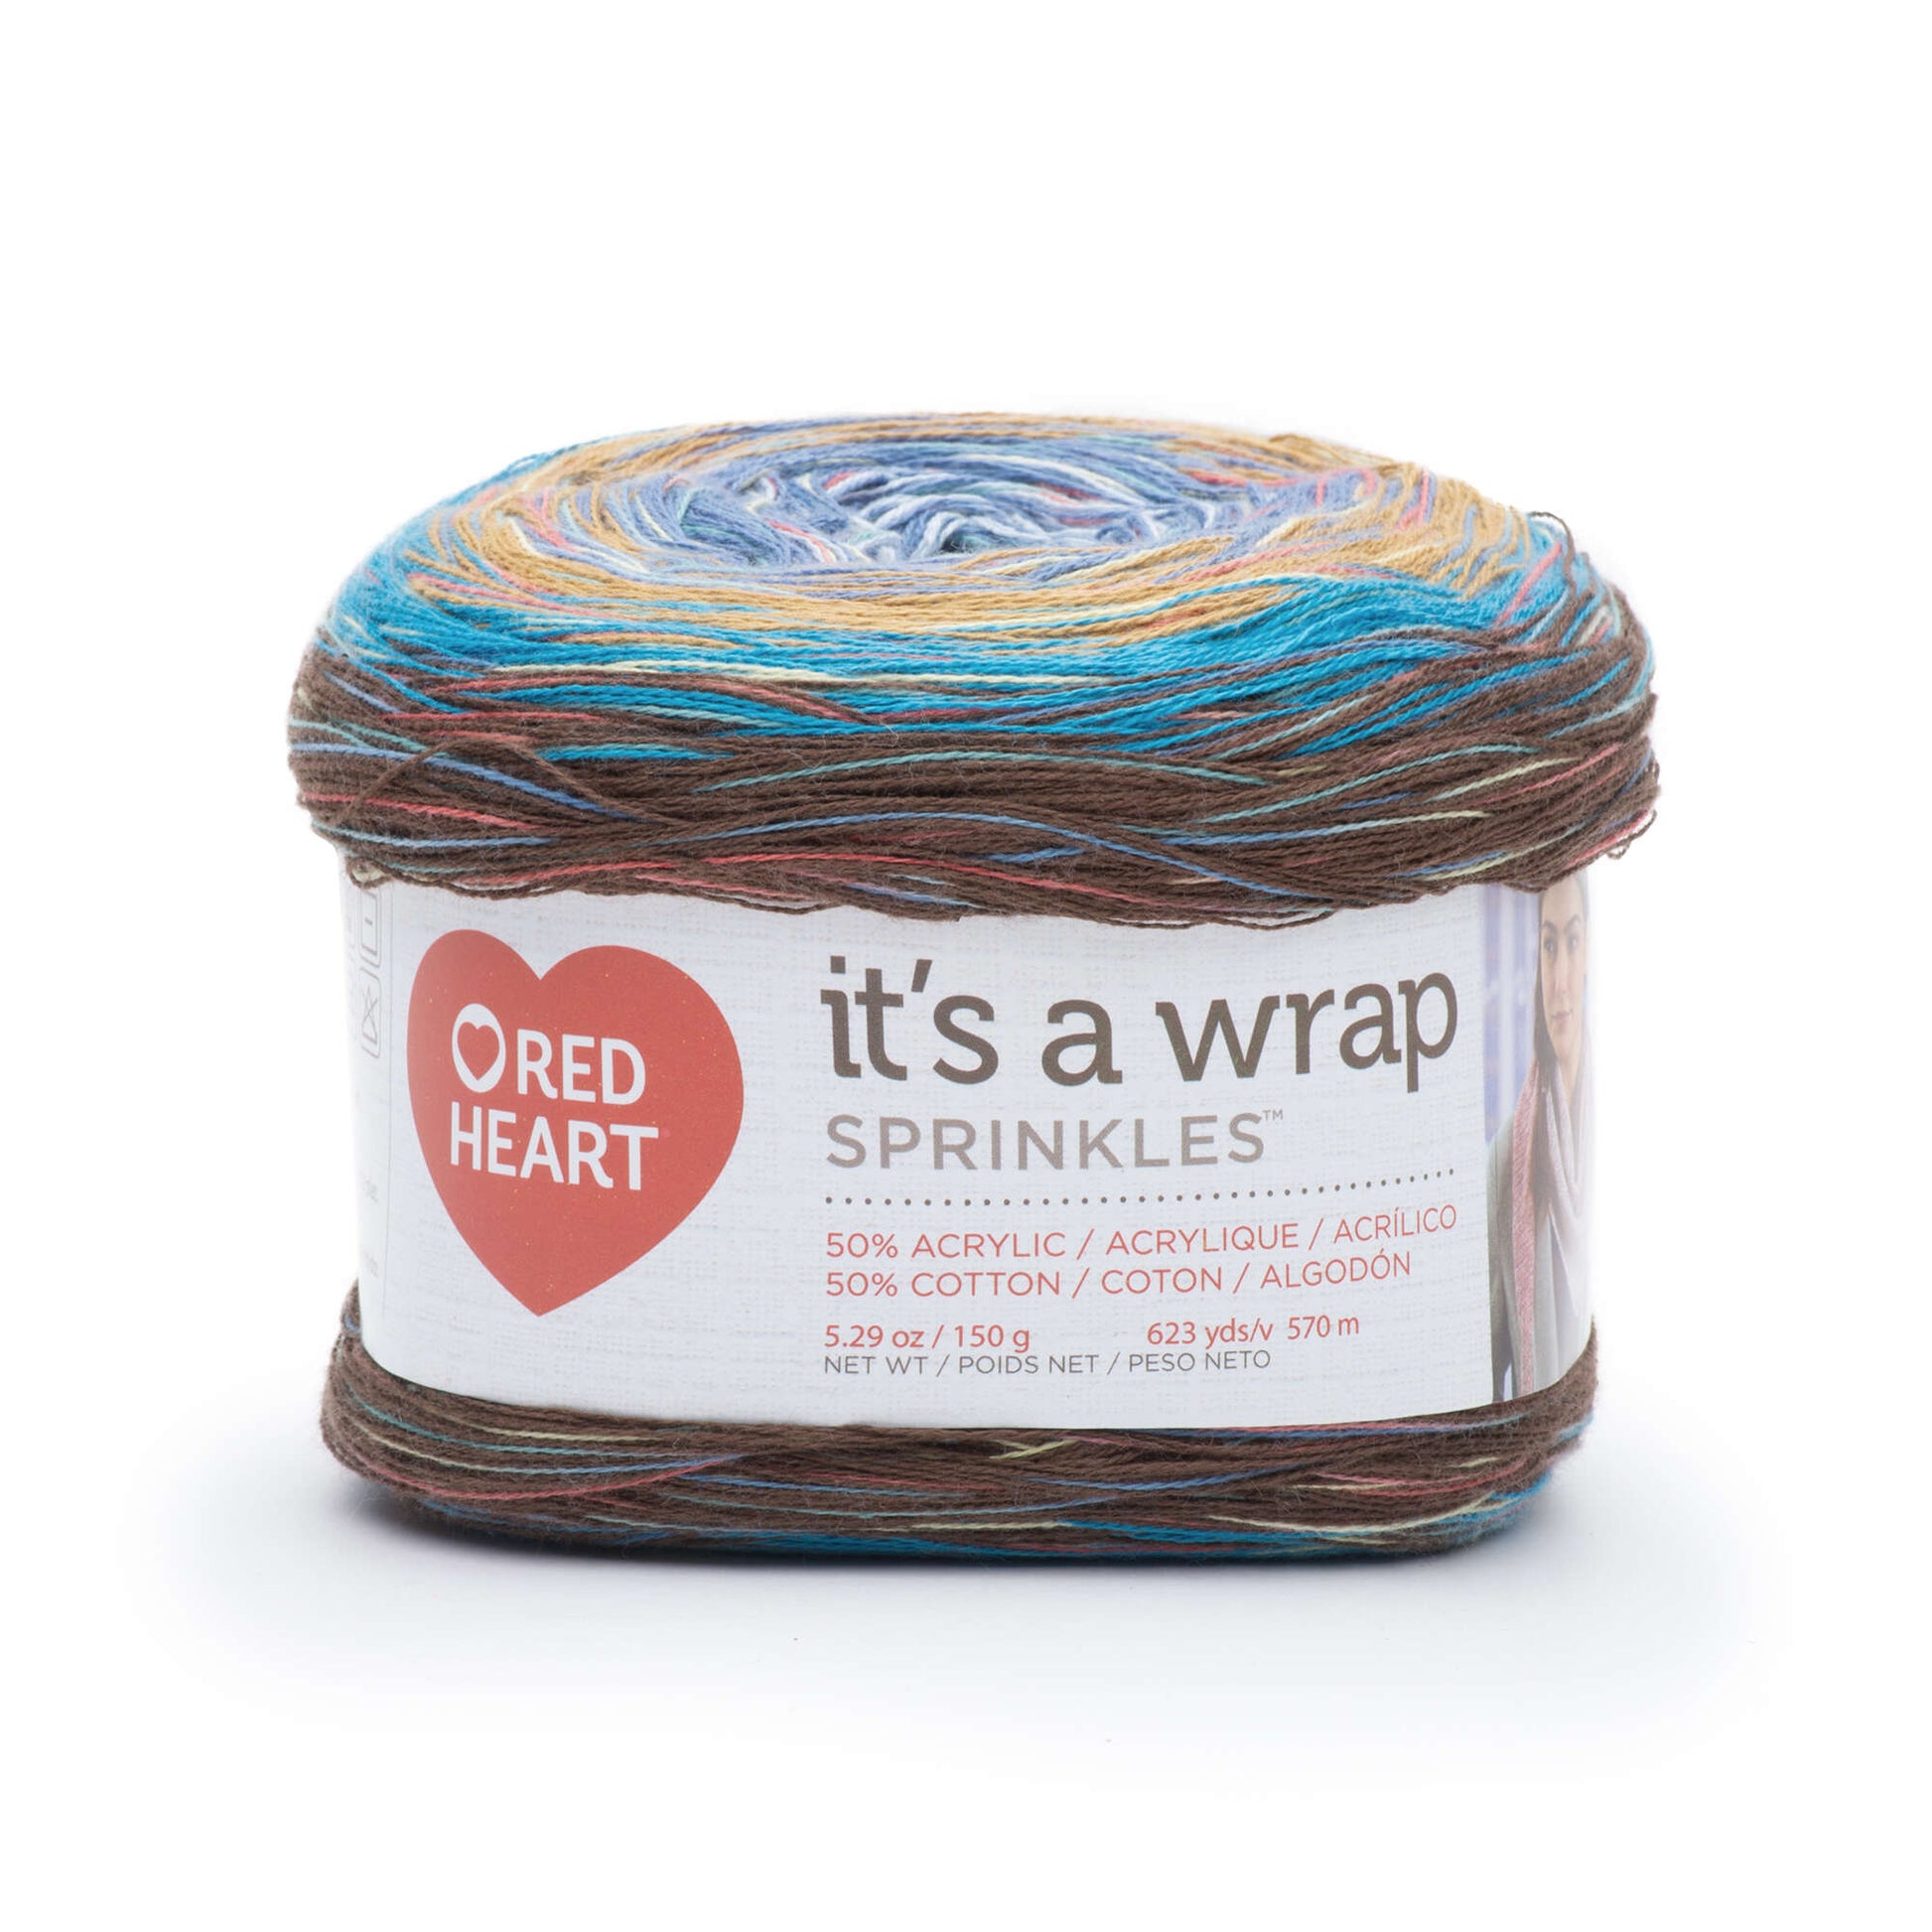 Red Heart It's a Wrap Sprinkles Yarn - Clearance shades Blueberry Tart